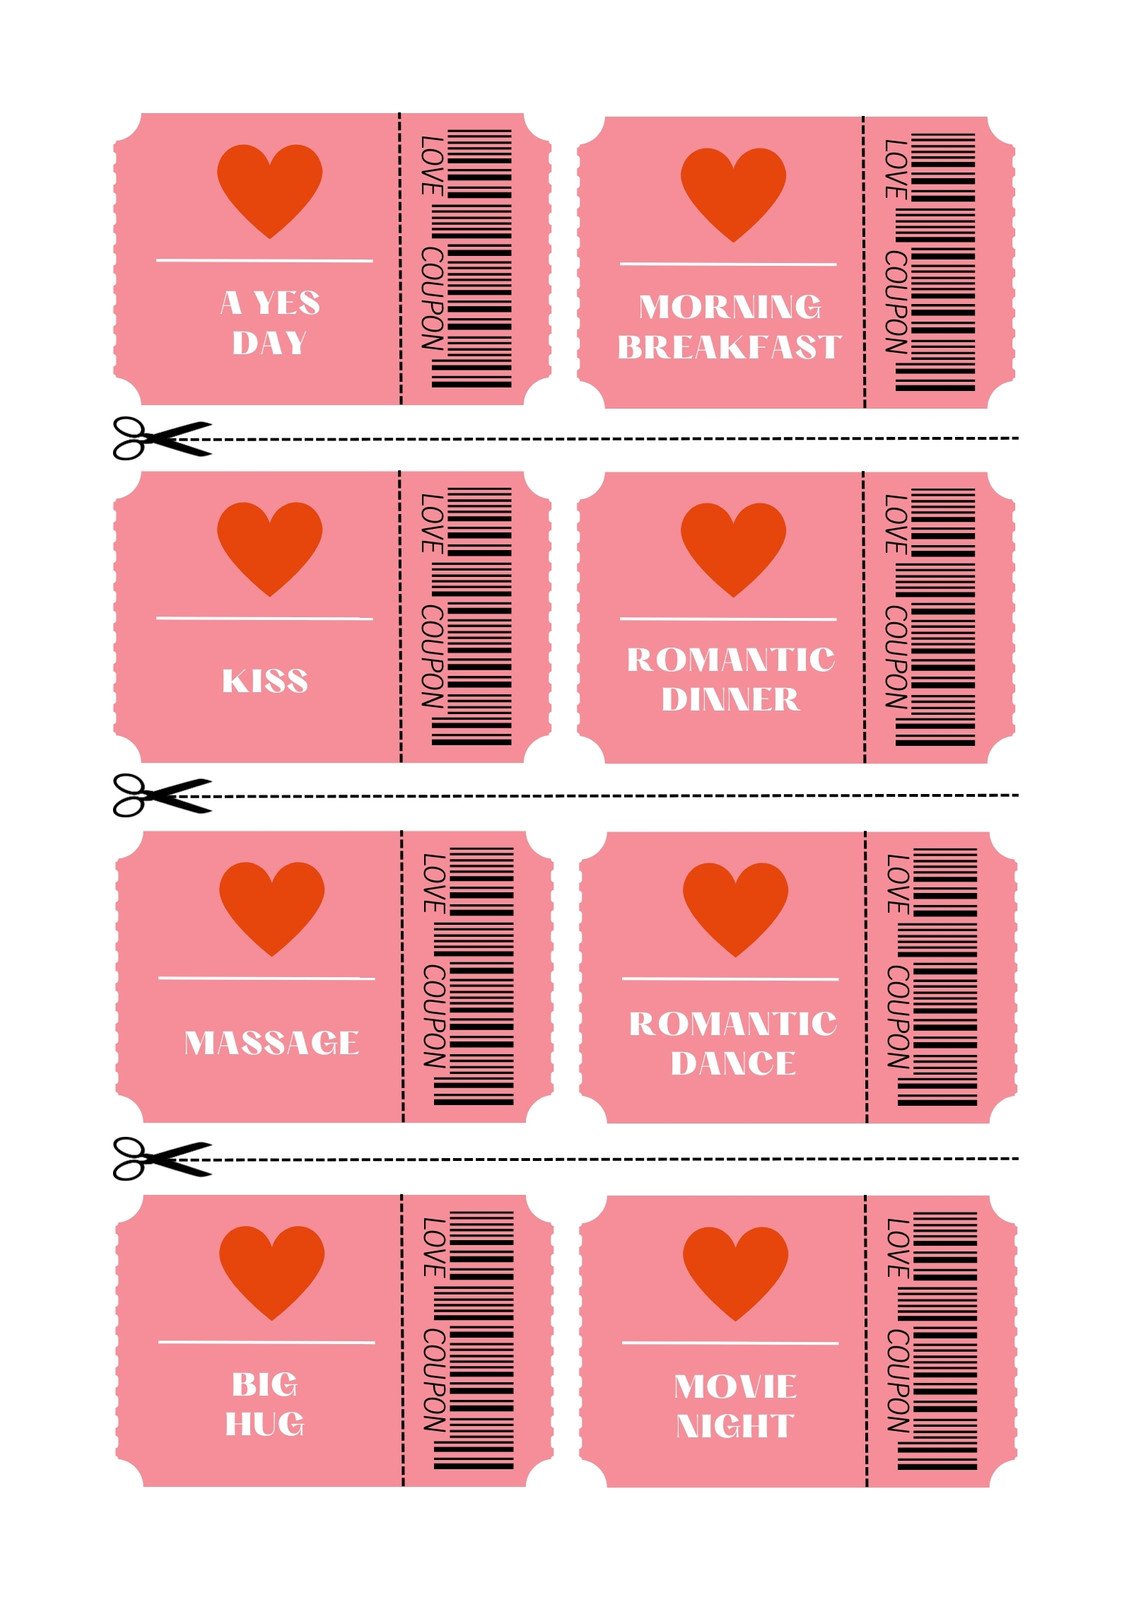 https://marketplace.canva.com/EAFXdKEvBlE/1/0/1131w/canva-pink-and-red-simple-valentine-love-coupons-Q_LrEoOswrc.jpg